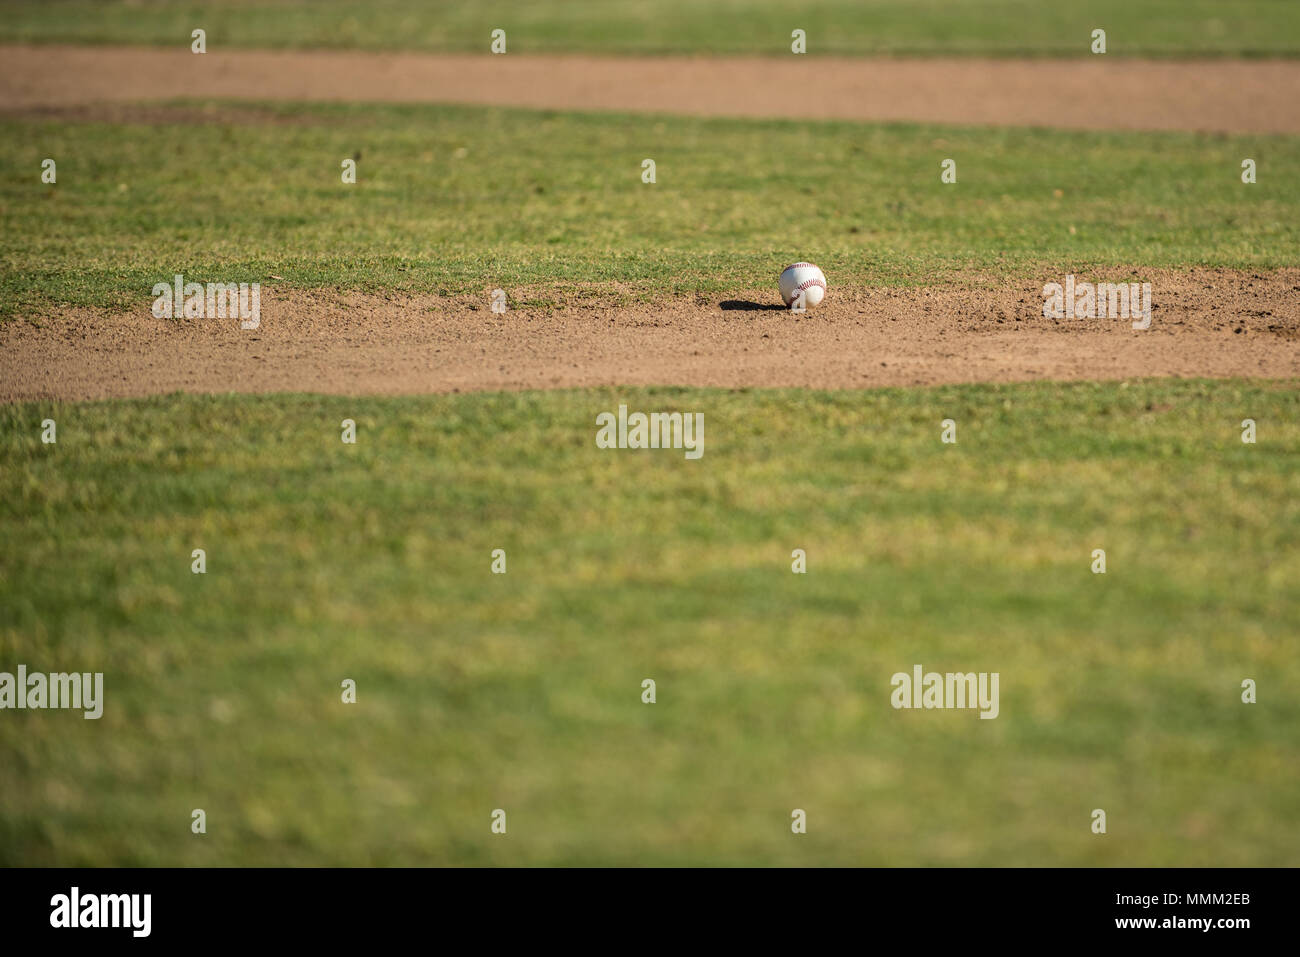 Baseball casting long shadow on the dirt of the field pitching mound. Stock Photo